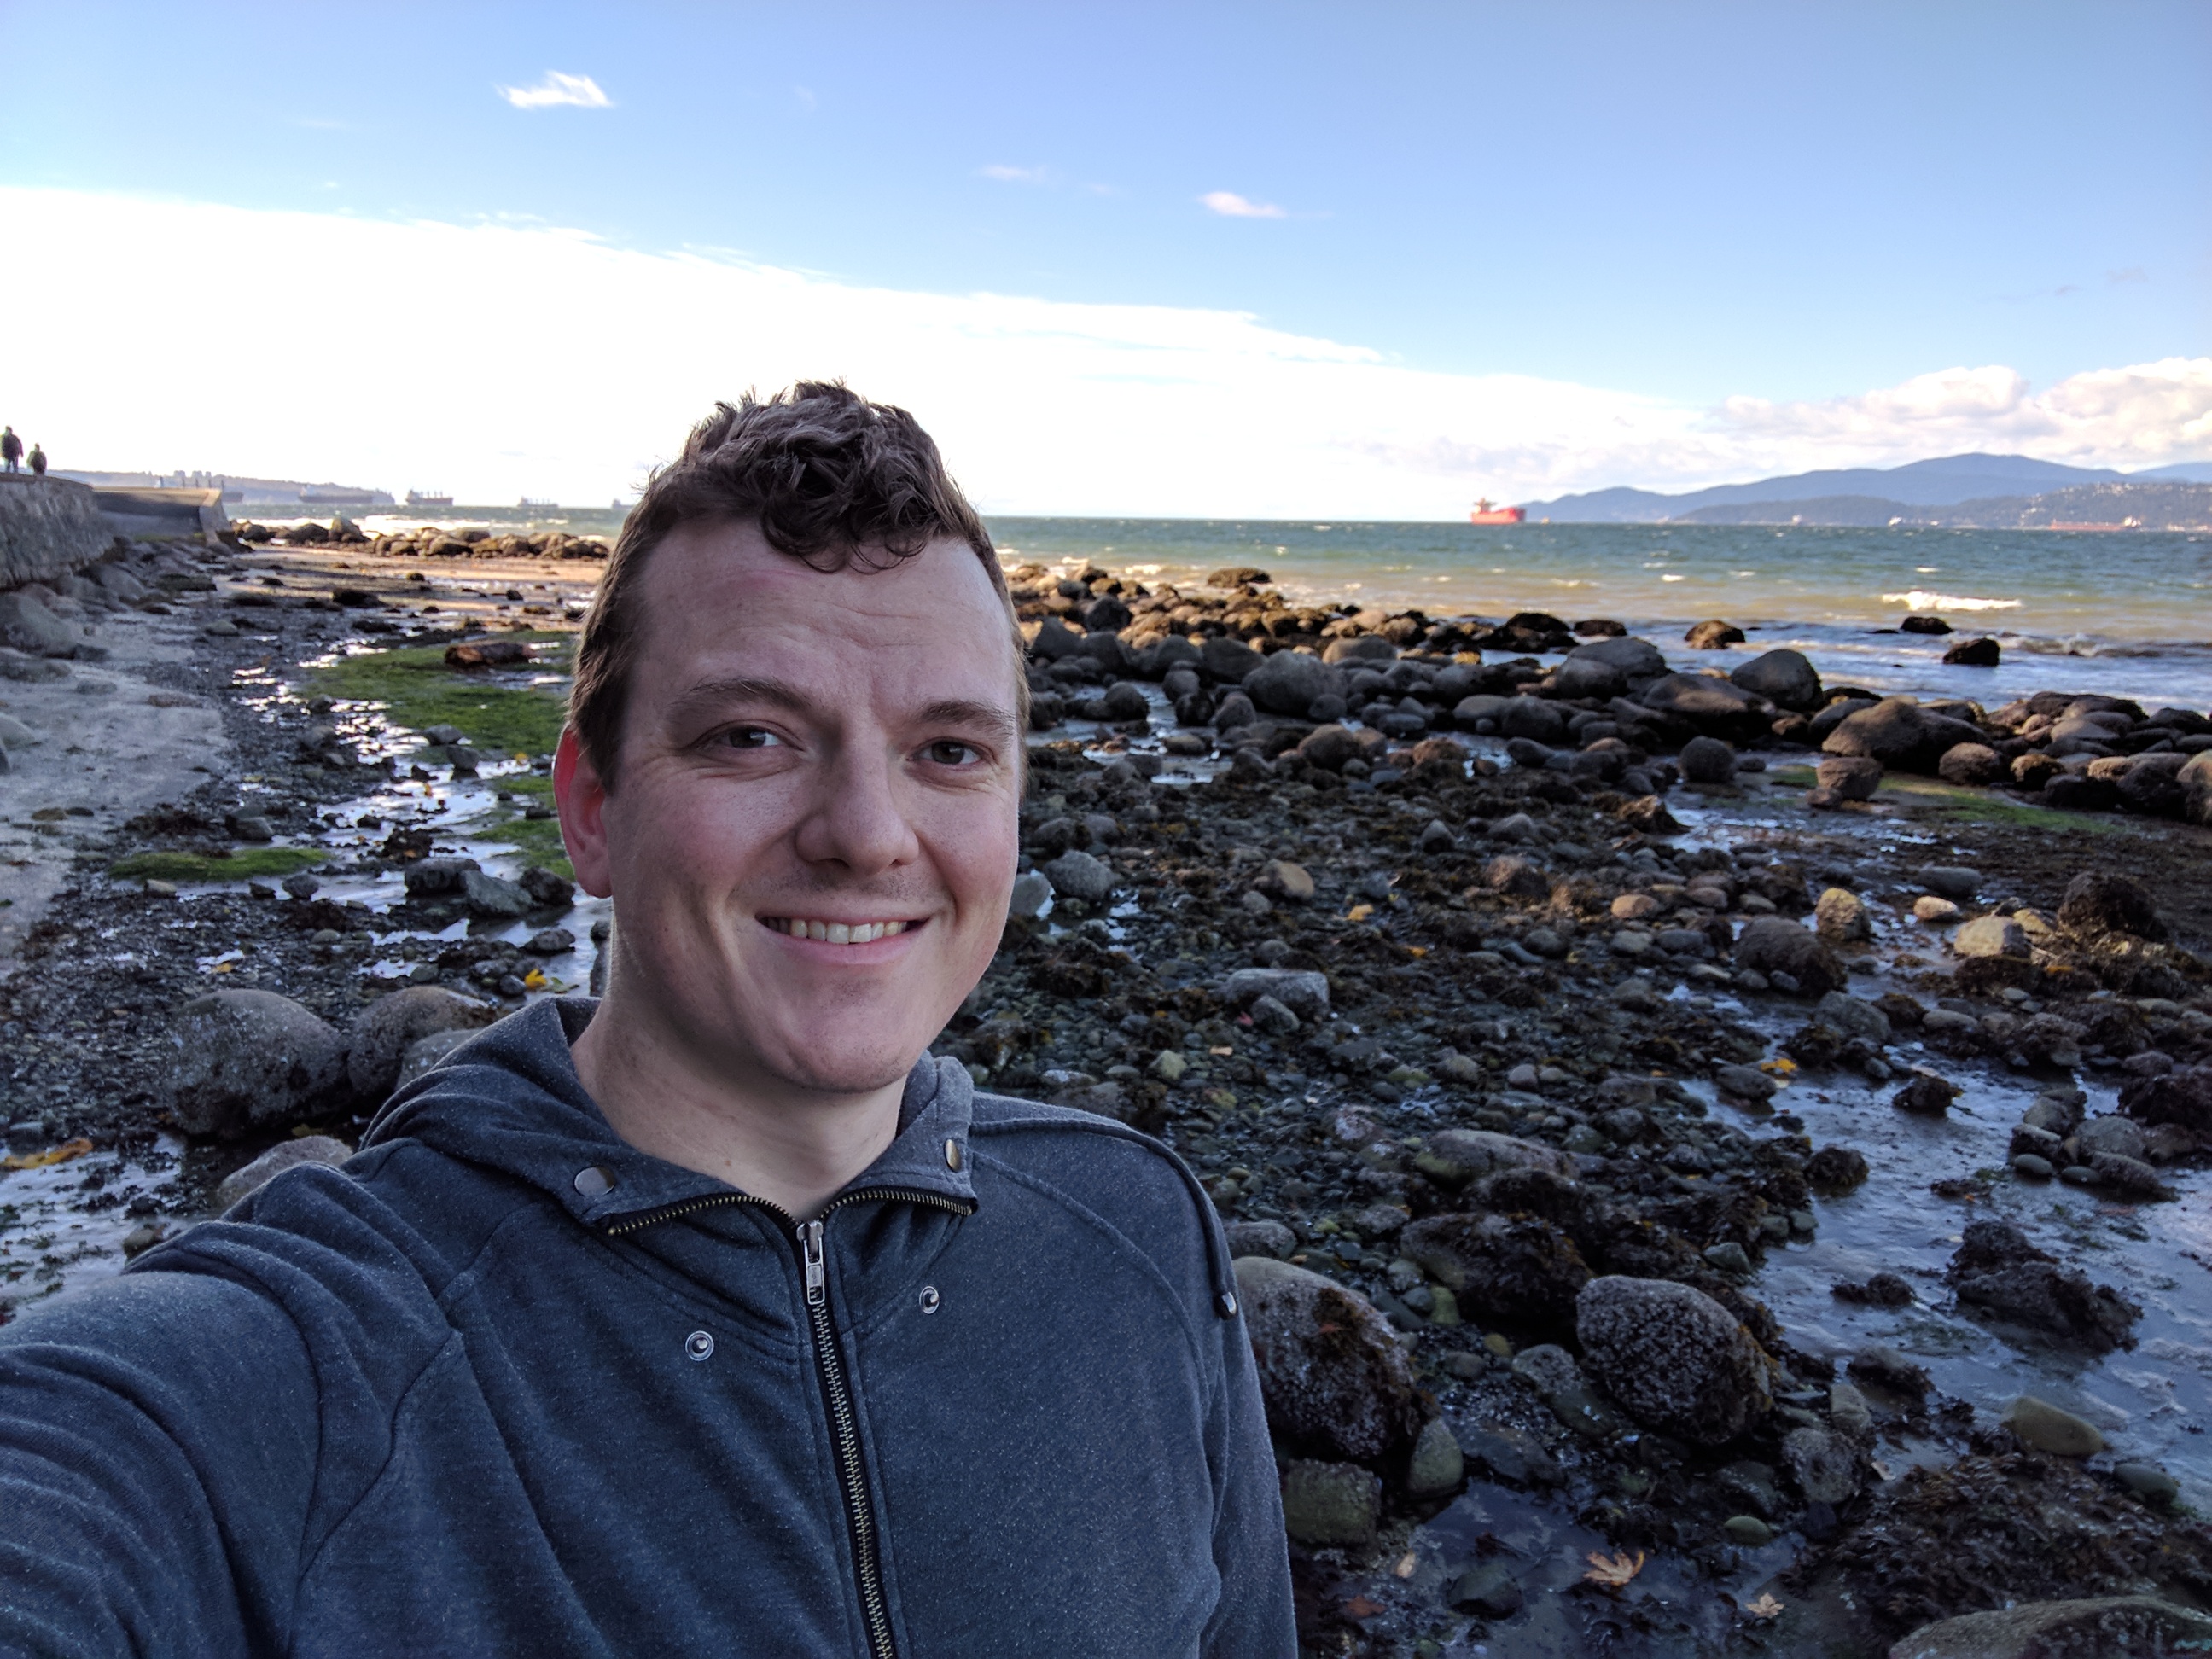 It's me, hanging out at Burrard Inlet at low tide. There's a bunch of massive ships off in the distance.